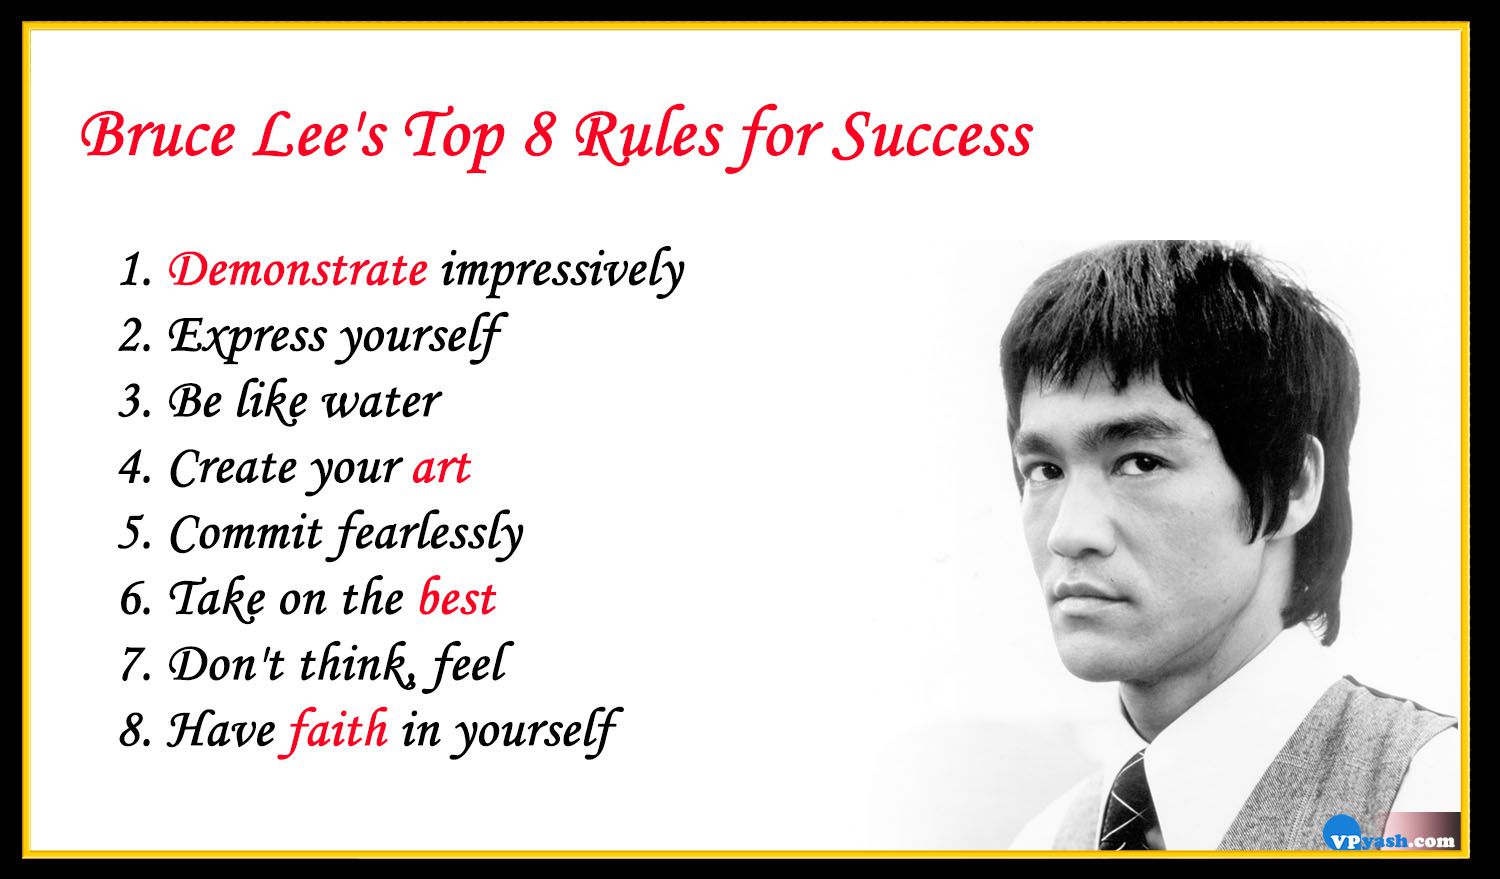 Bruce Lee Top 8 Inspiring Rules for Success